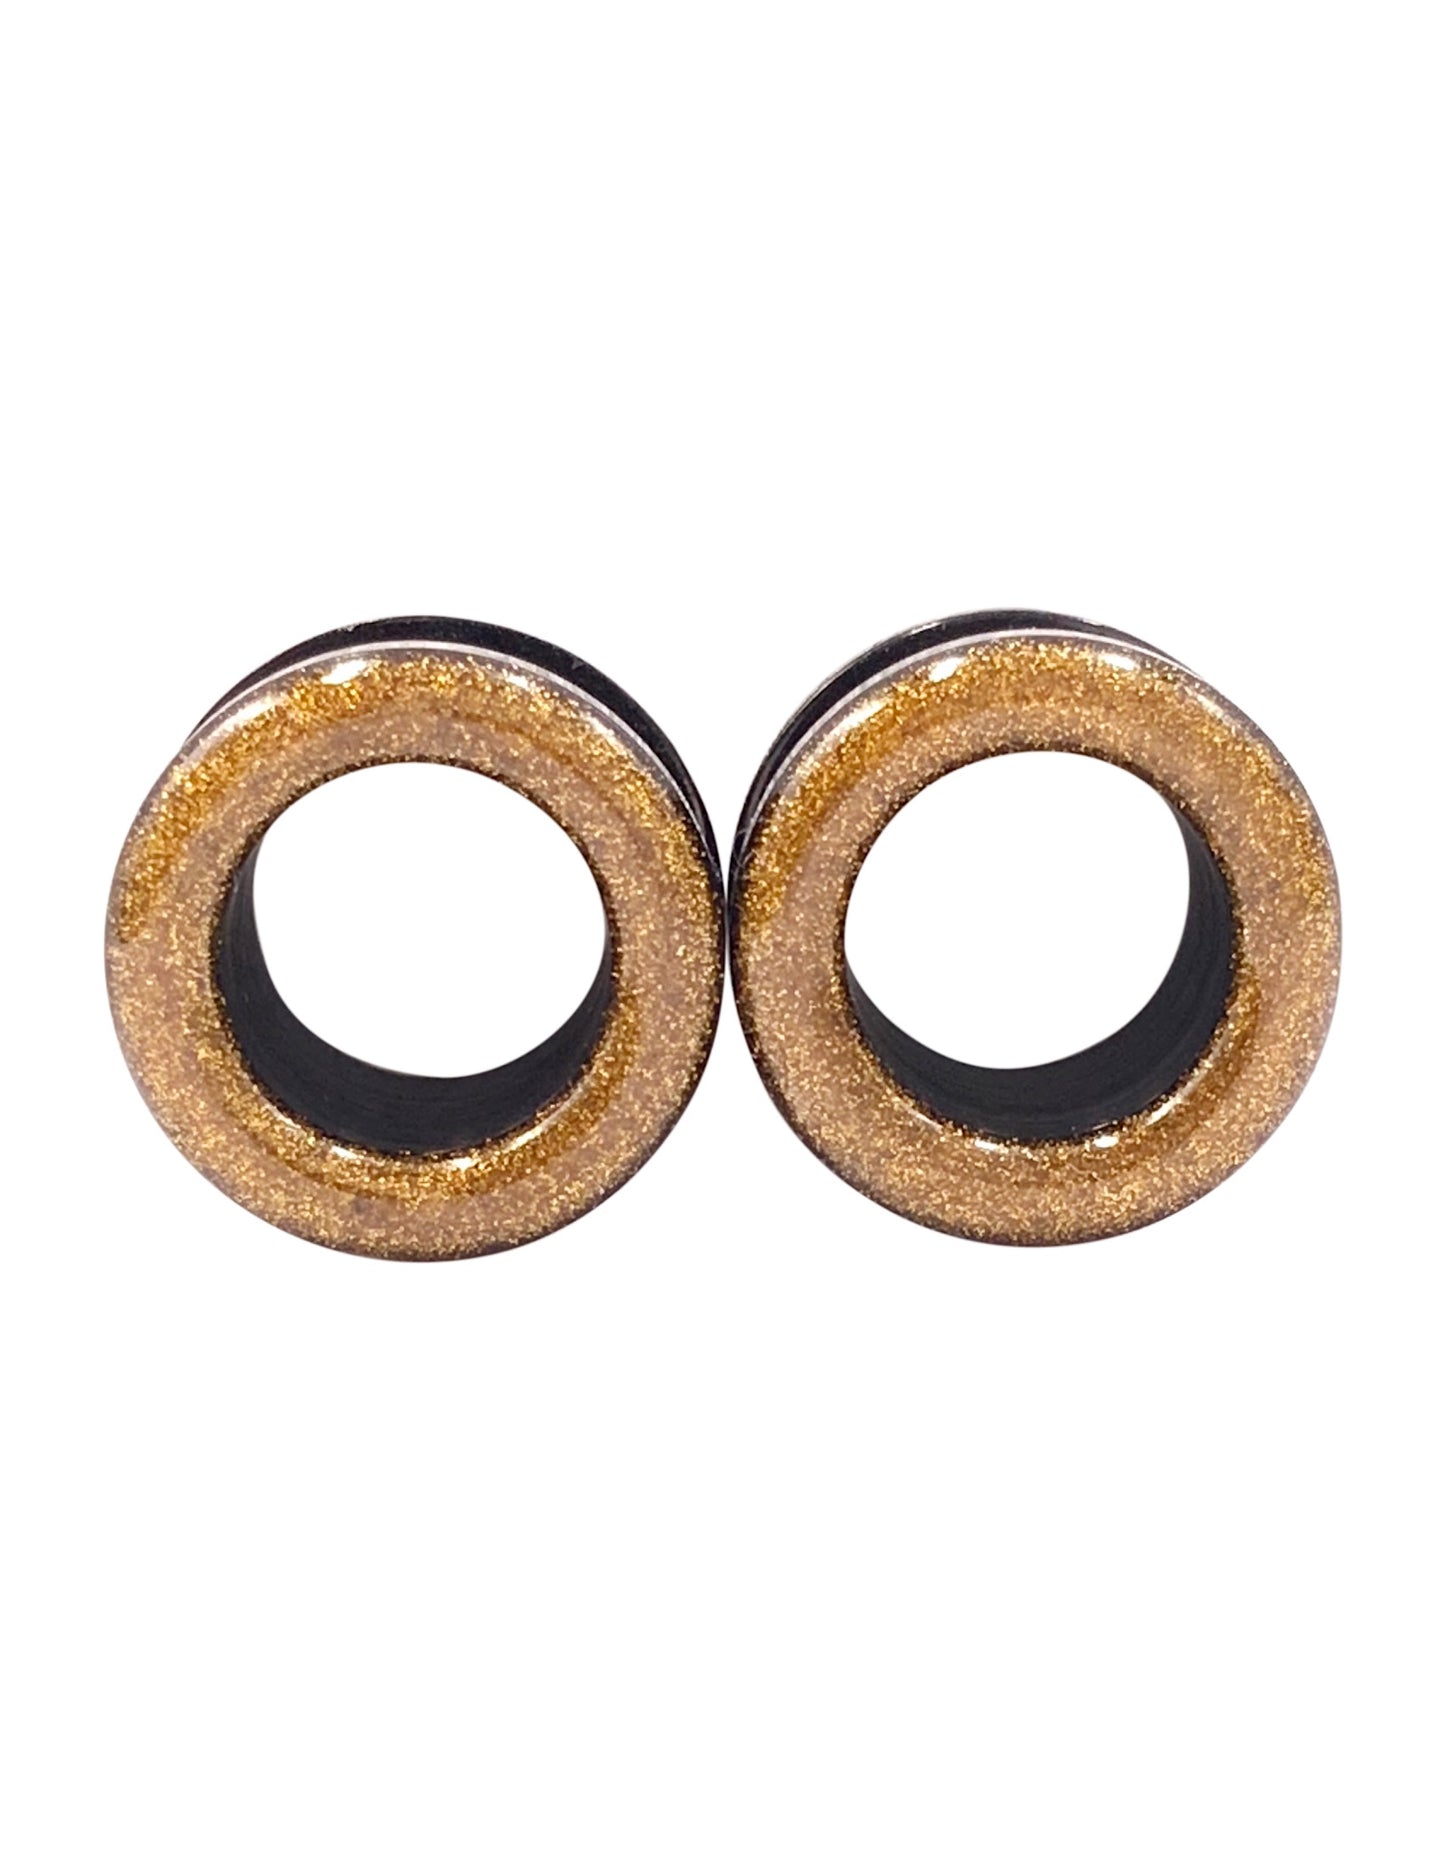 Deep Gold Shimmer Tunnel Plugs